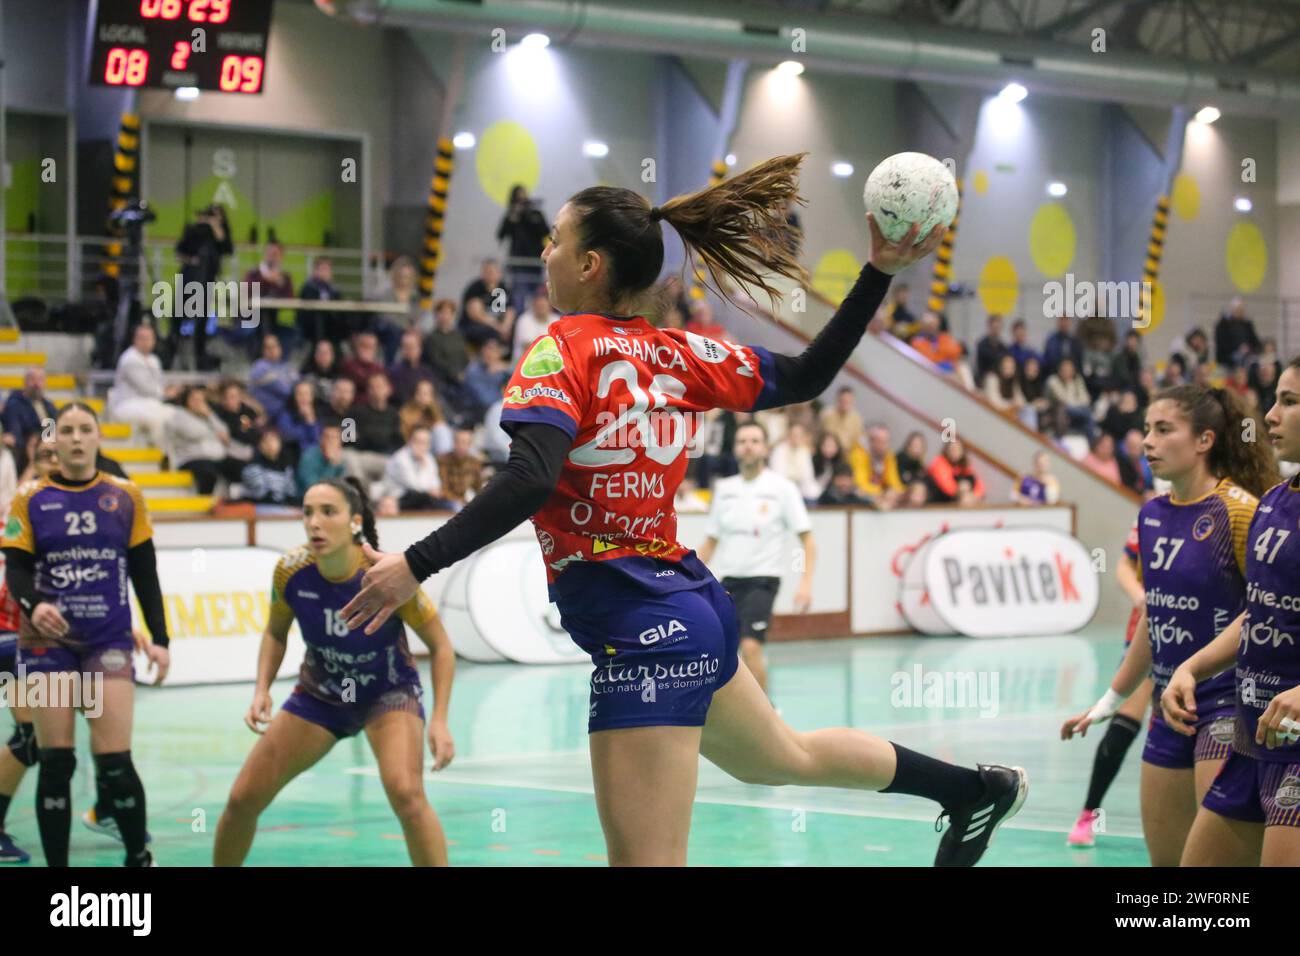 Gijón, Spain, January 27th, 2024: Conserbas Orbe player Rubensa BM. Porriño, Thais Adrielle (26) shoots on goal during the 15th Matchday of the Liga Guerreras Iberdrola 2023-24 between Motive.co Gijón Balonmano La Calzada and Conserbas Orbe Rubensa BM. Porriño, on January 27, 2024, at the Arena Pavilion, in Gijón, Spain. Credit: Alberto Brevers / Alamy Live News. Stock Photo